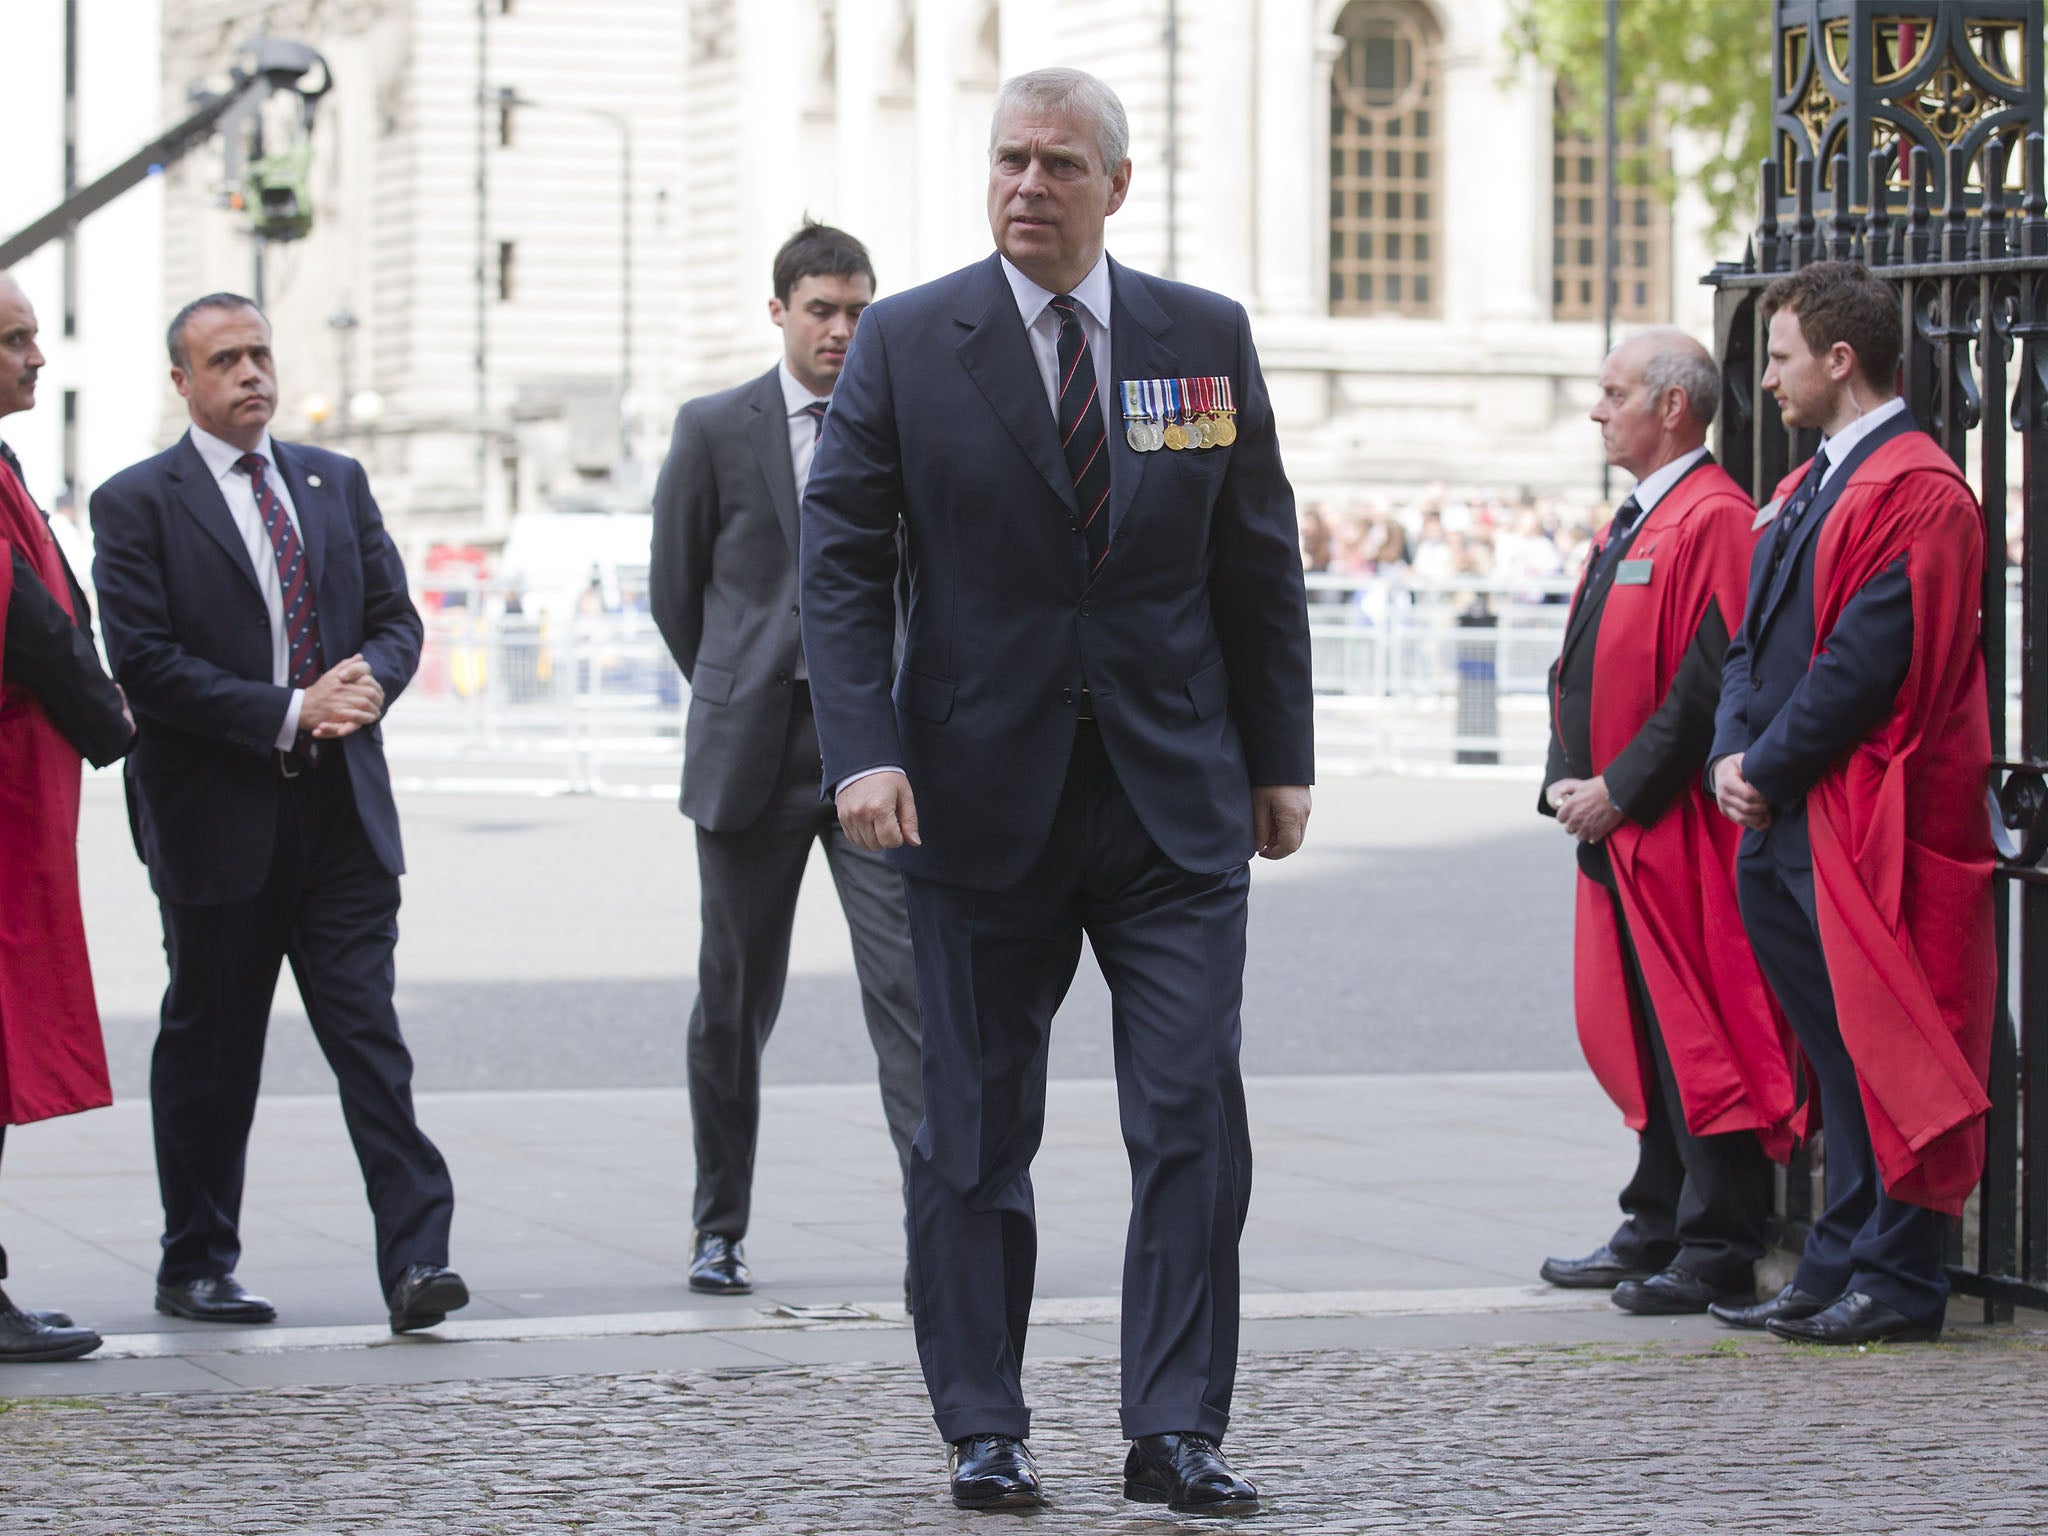 Prince Andrew, Duke of York, arrives to attend a service of national thanksgiving to mark the 70th anniversary of VE Day, the end of the Second World War in Europe, at Westminster Abbey in London on 10 May 2015.